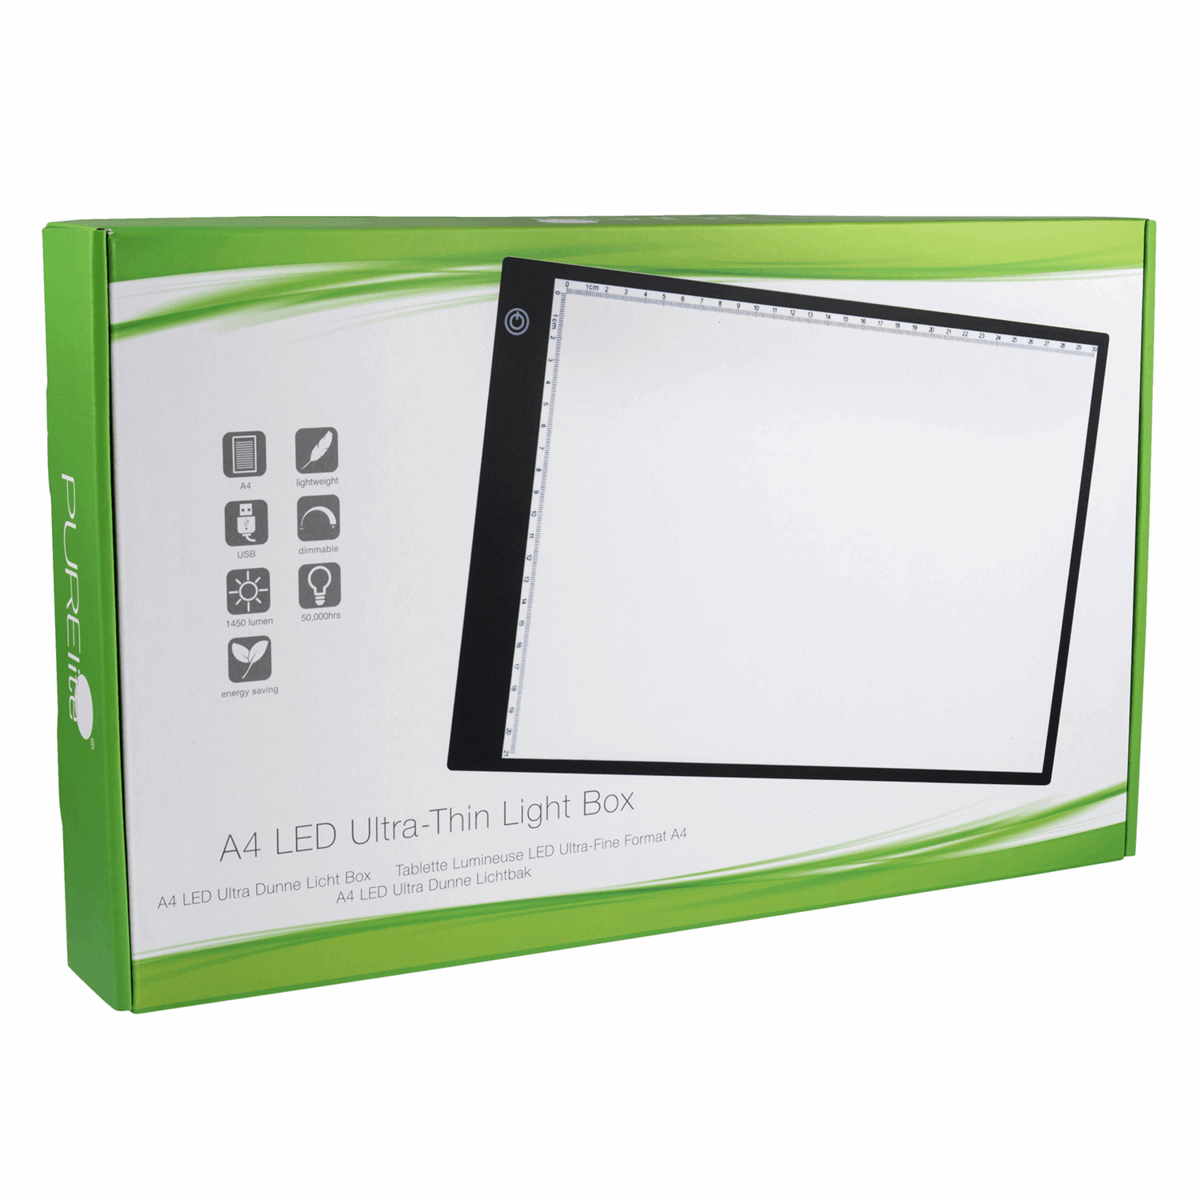 PURElite A4 Ultrathin Led Light Box with Natural Daylight dimmable LEDs - Features ruler border, USB, battery or mains powered